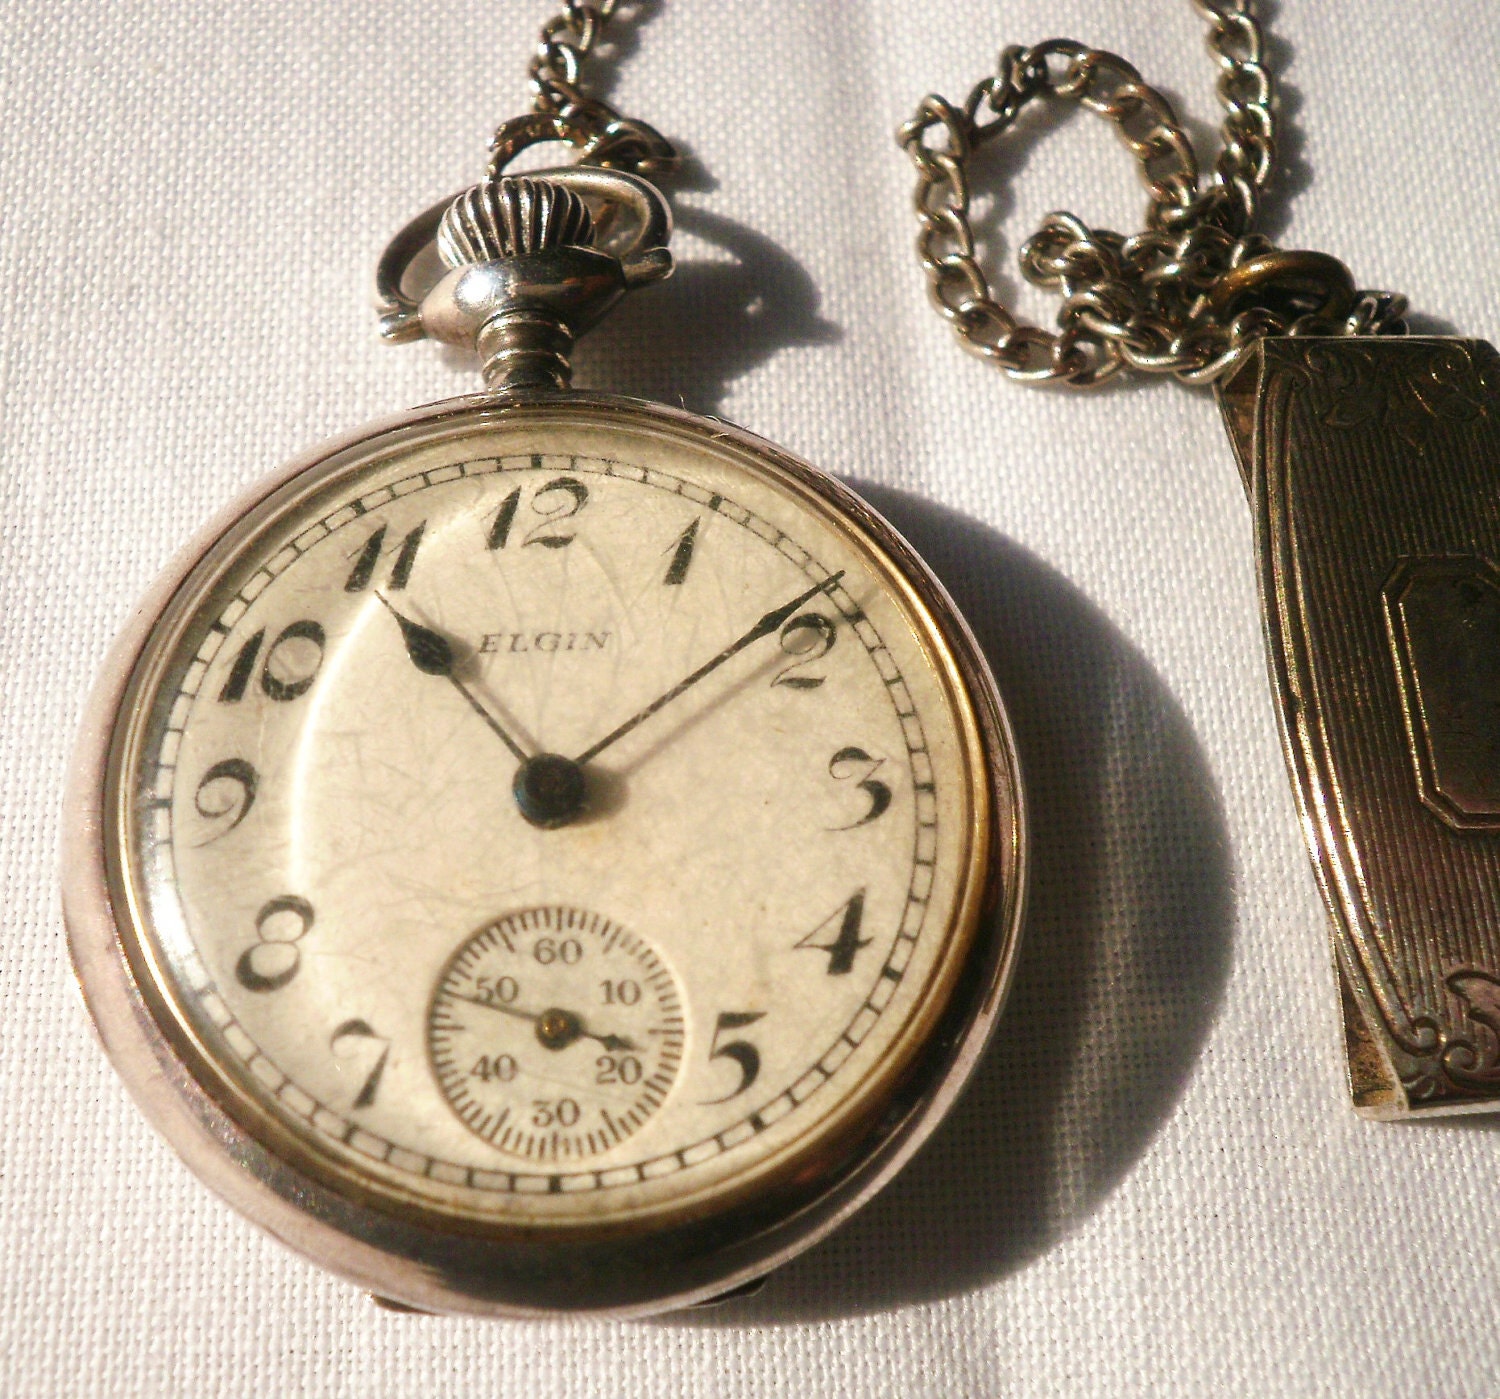 Vintage Sterling Silver Elgin Pocket Watch by antiquario on Etsy